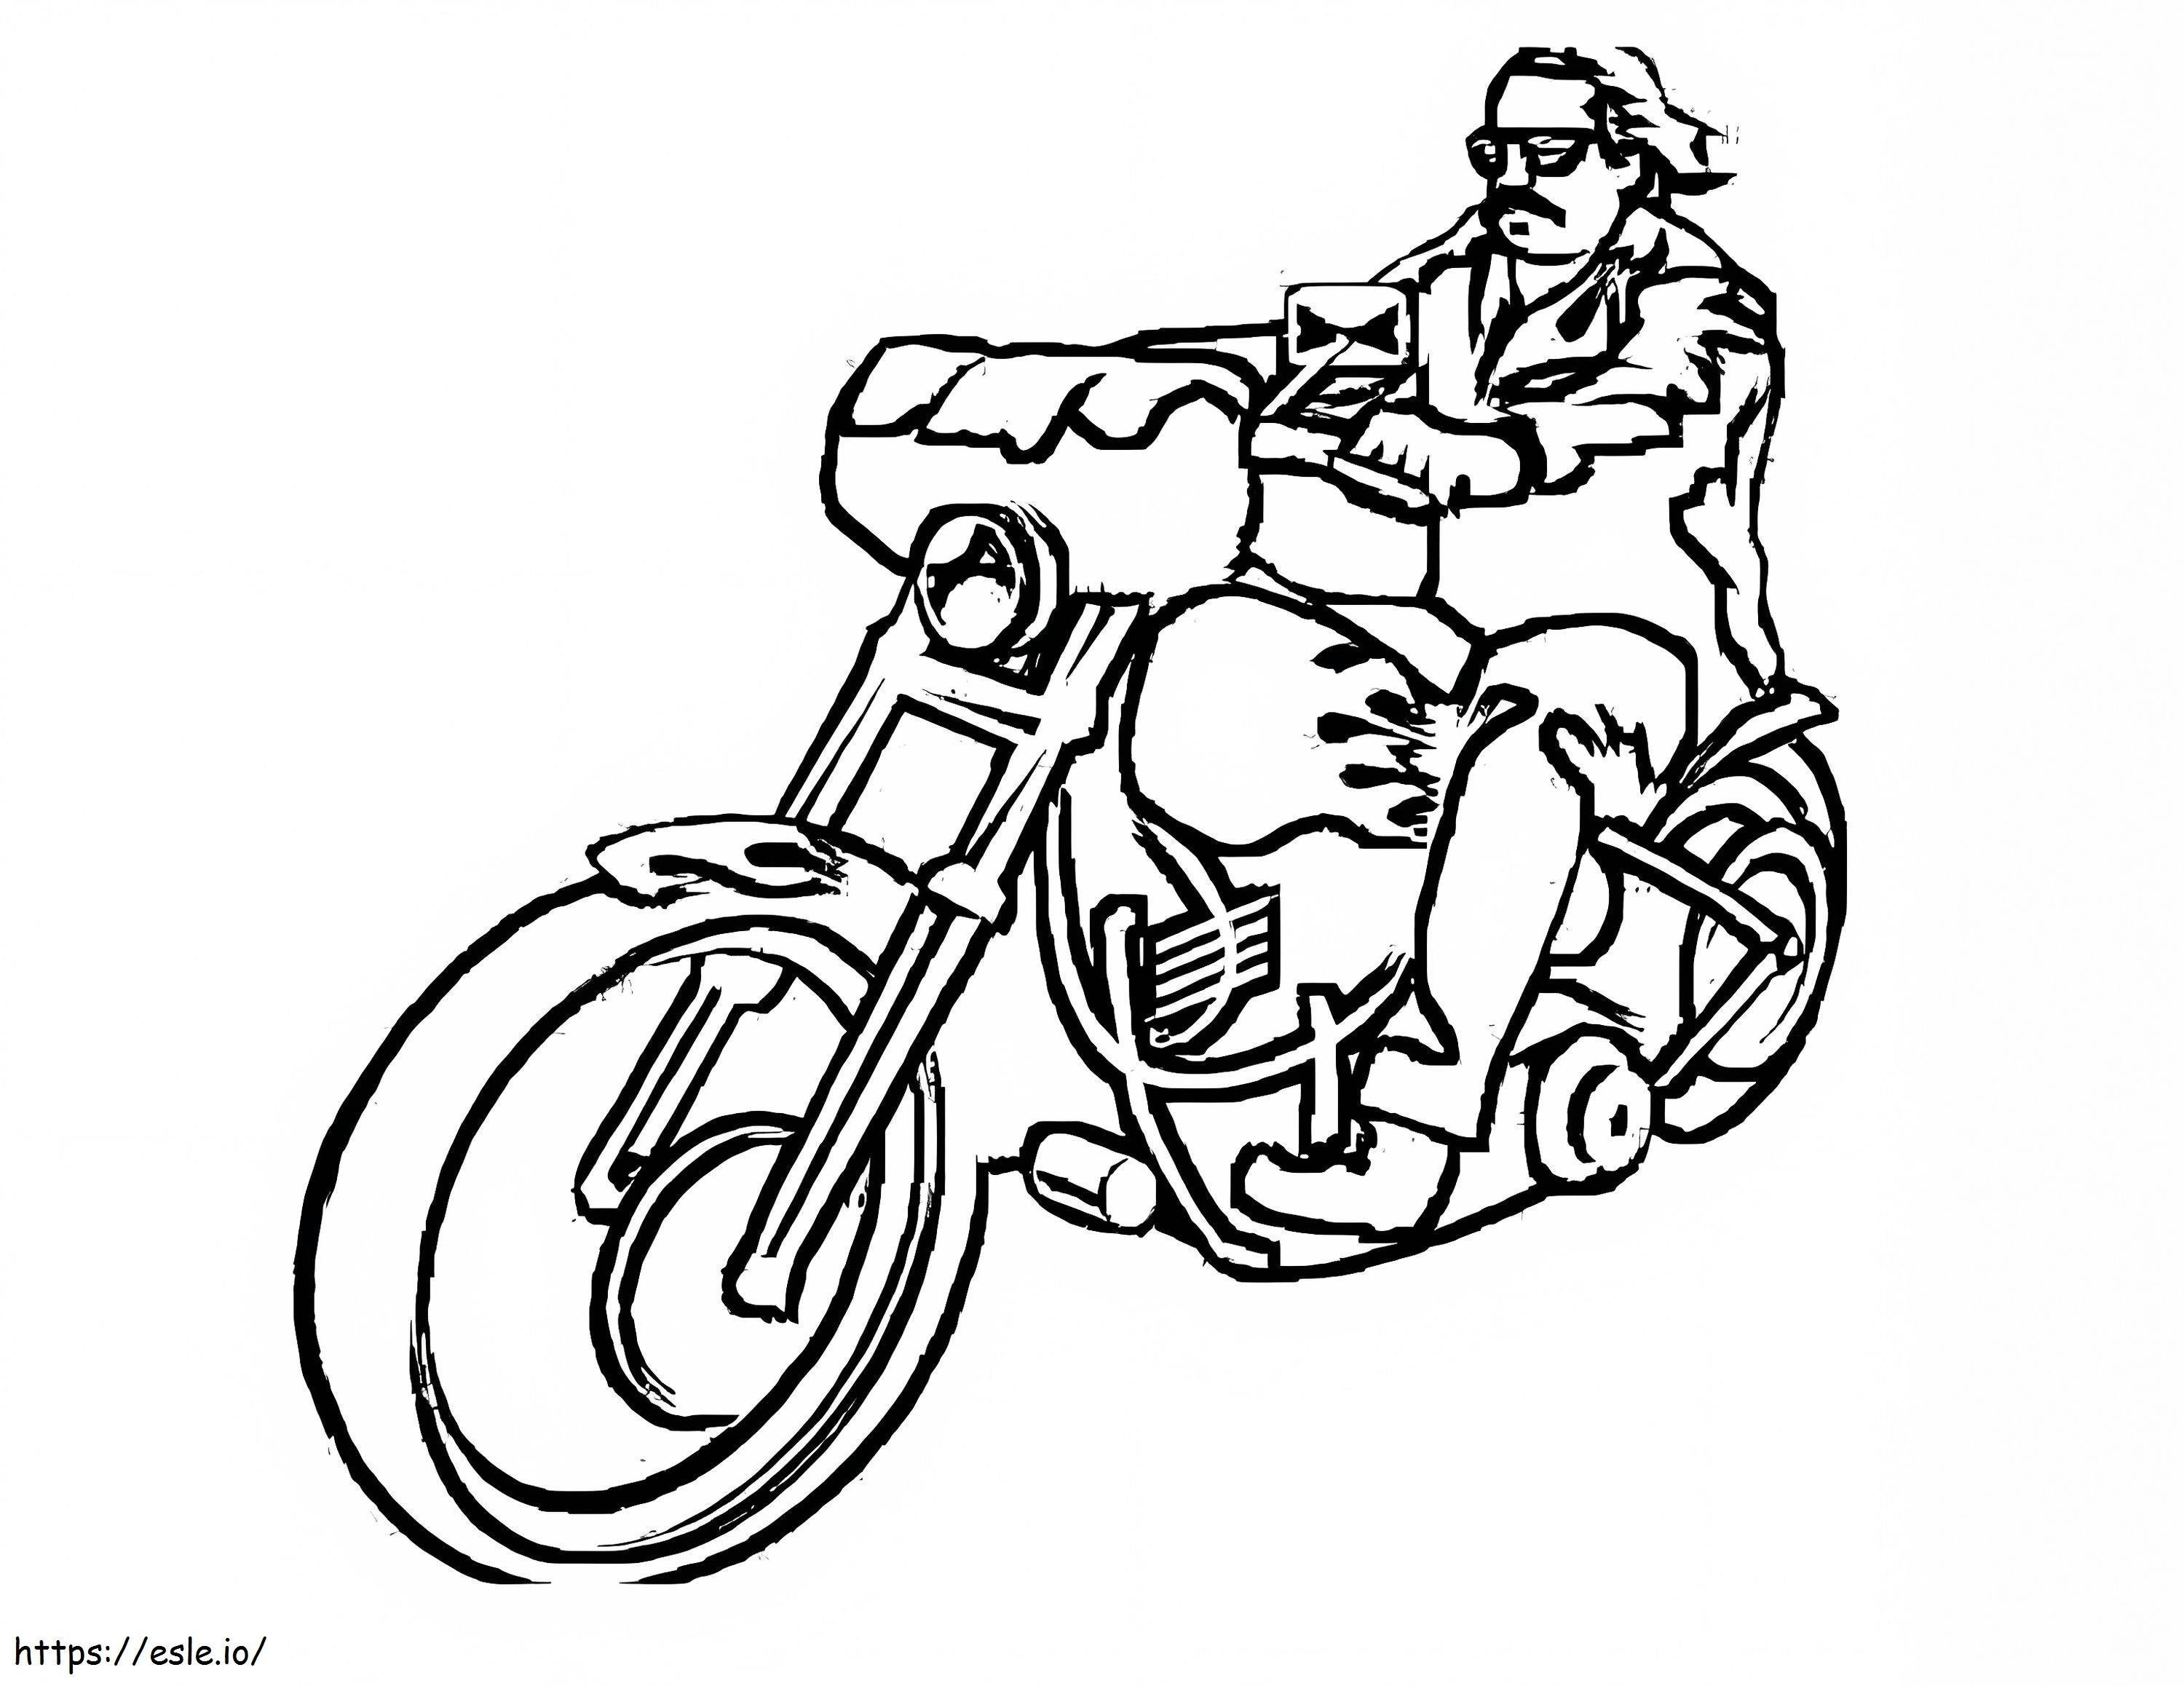 Man Riding A Motorcycle coloring page